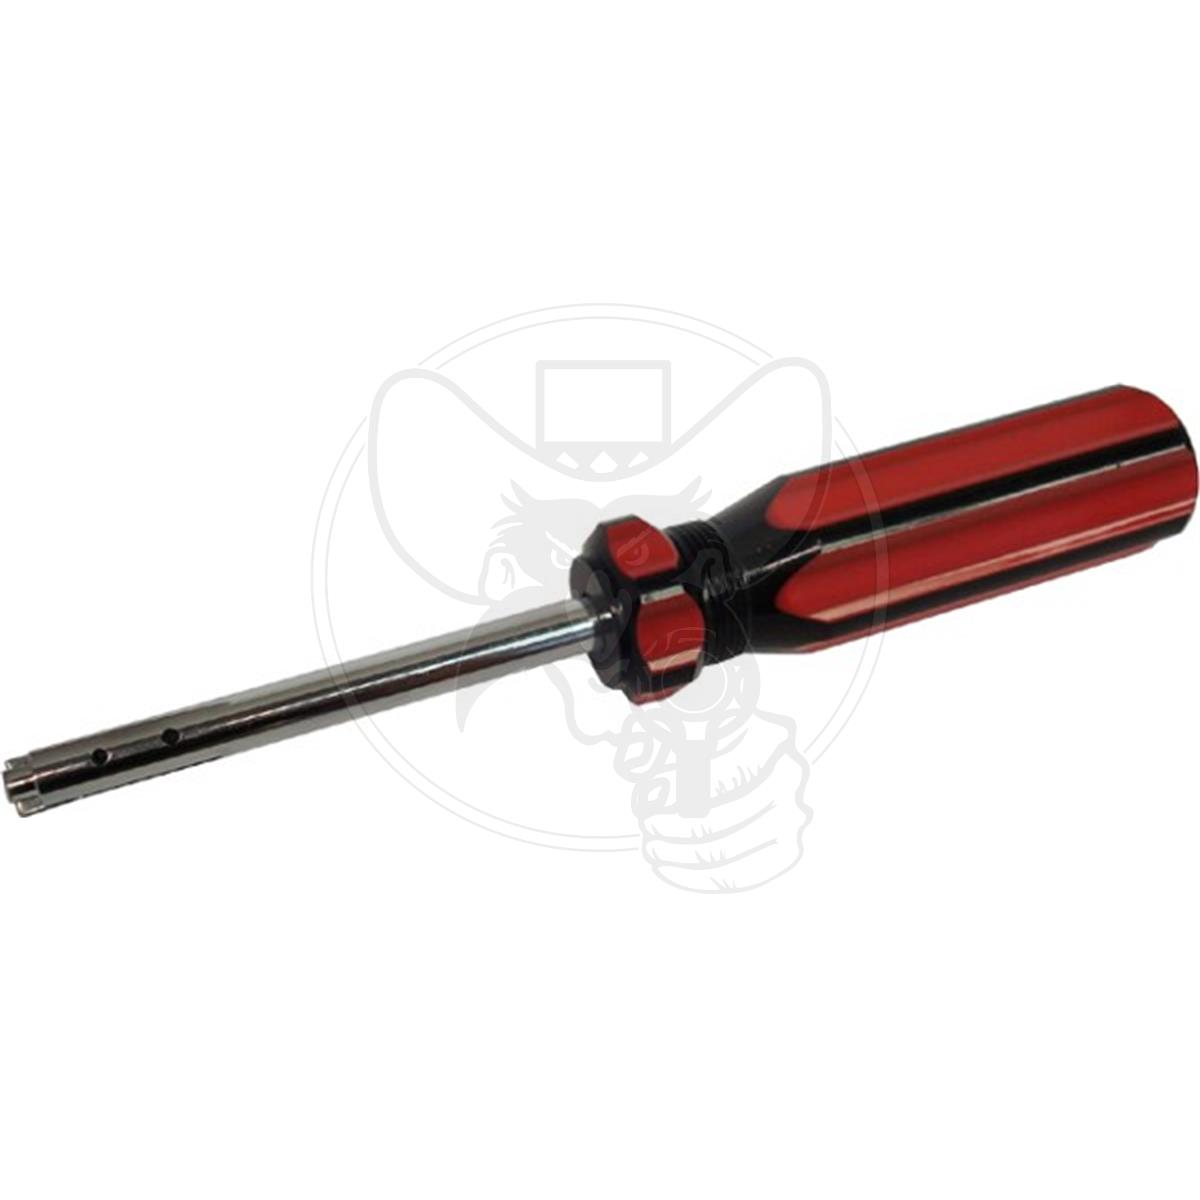 PROFORM CARBY JET INSTALLATION TOOL FITS HOLLEY